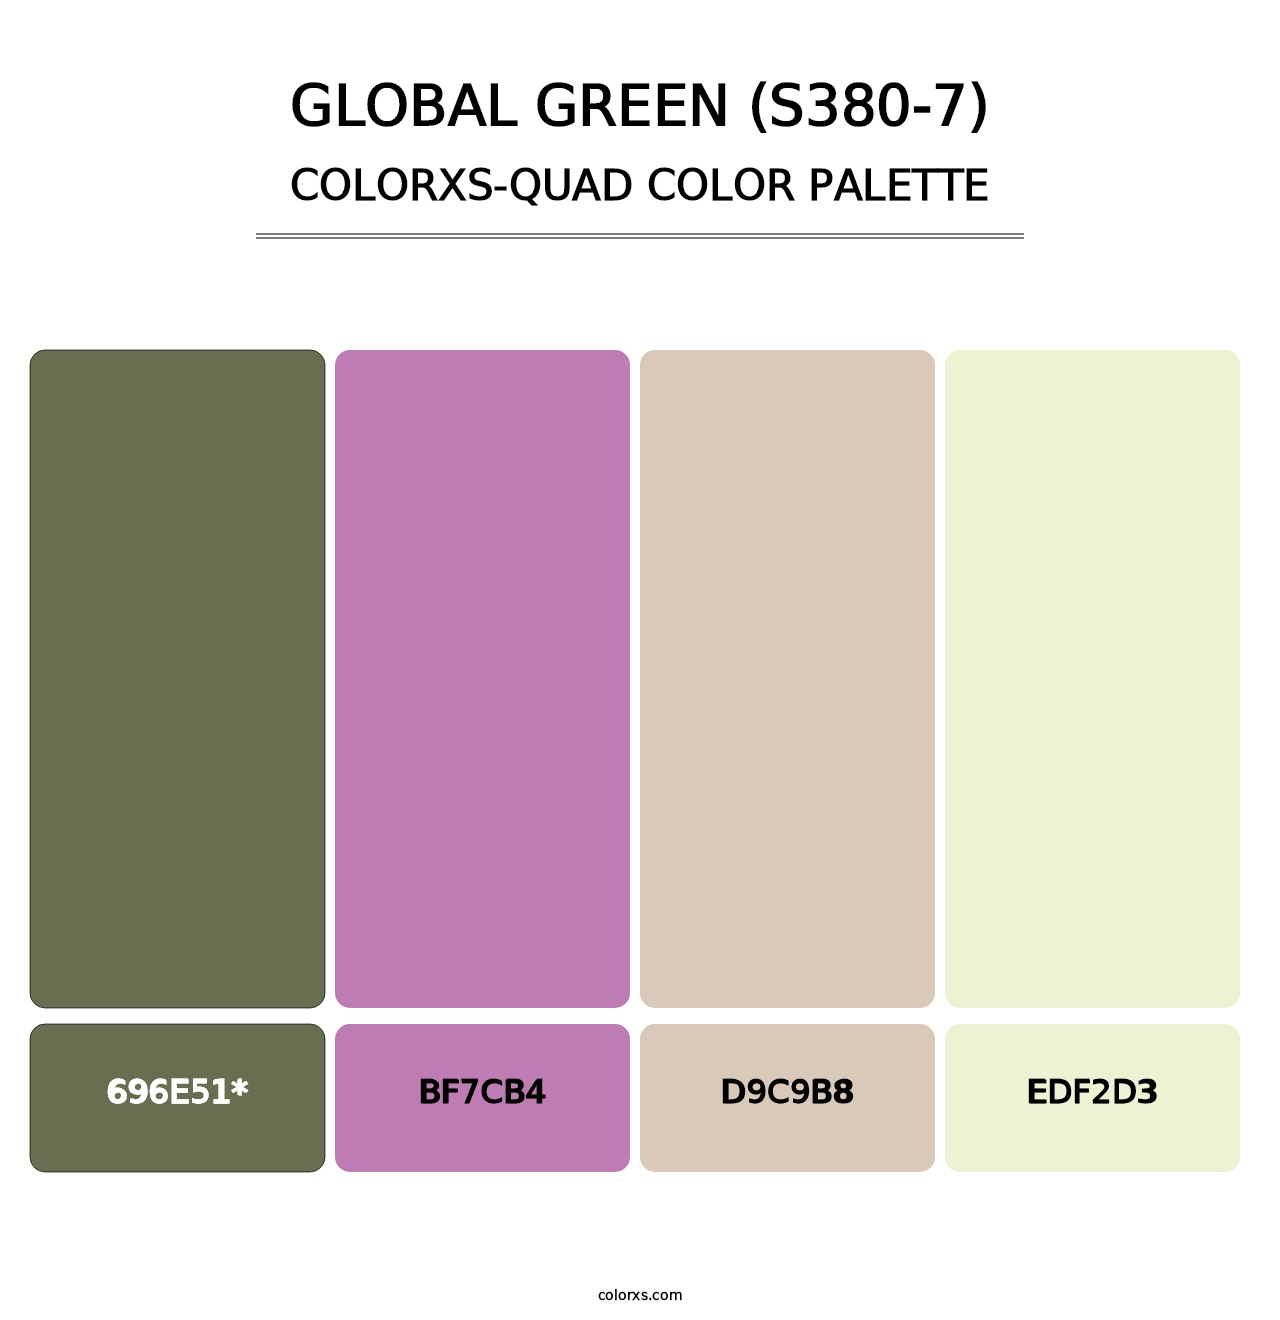 Global Green (S380-7) - Colorxs Quad Palette